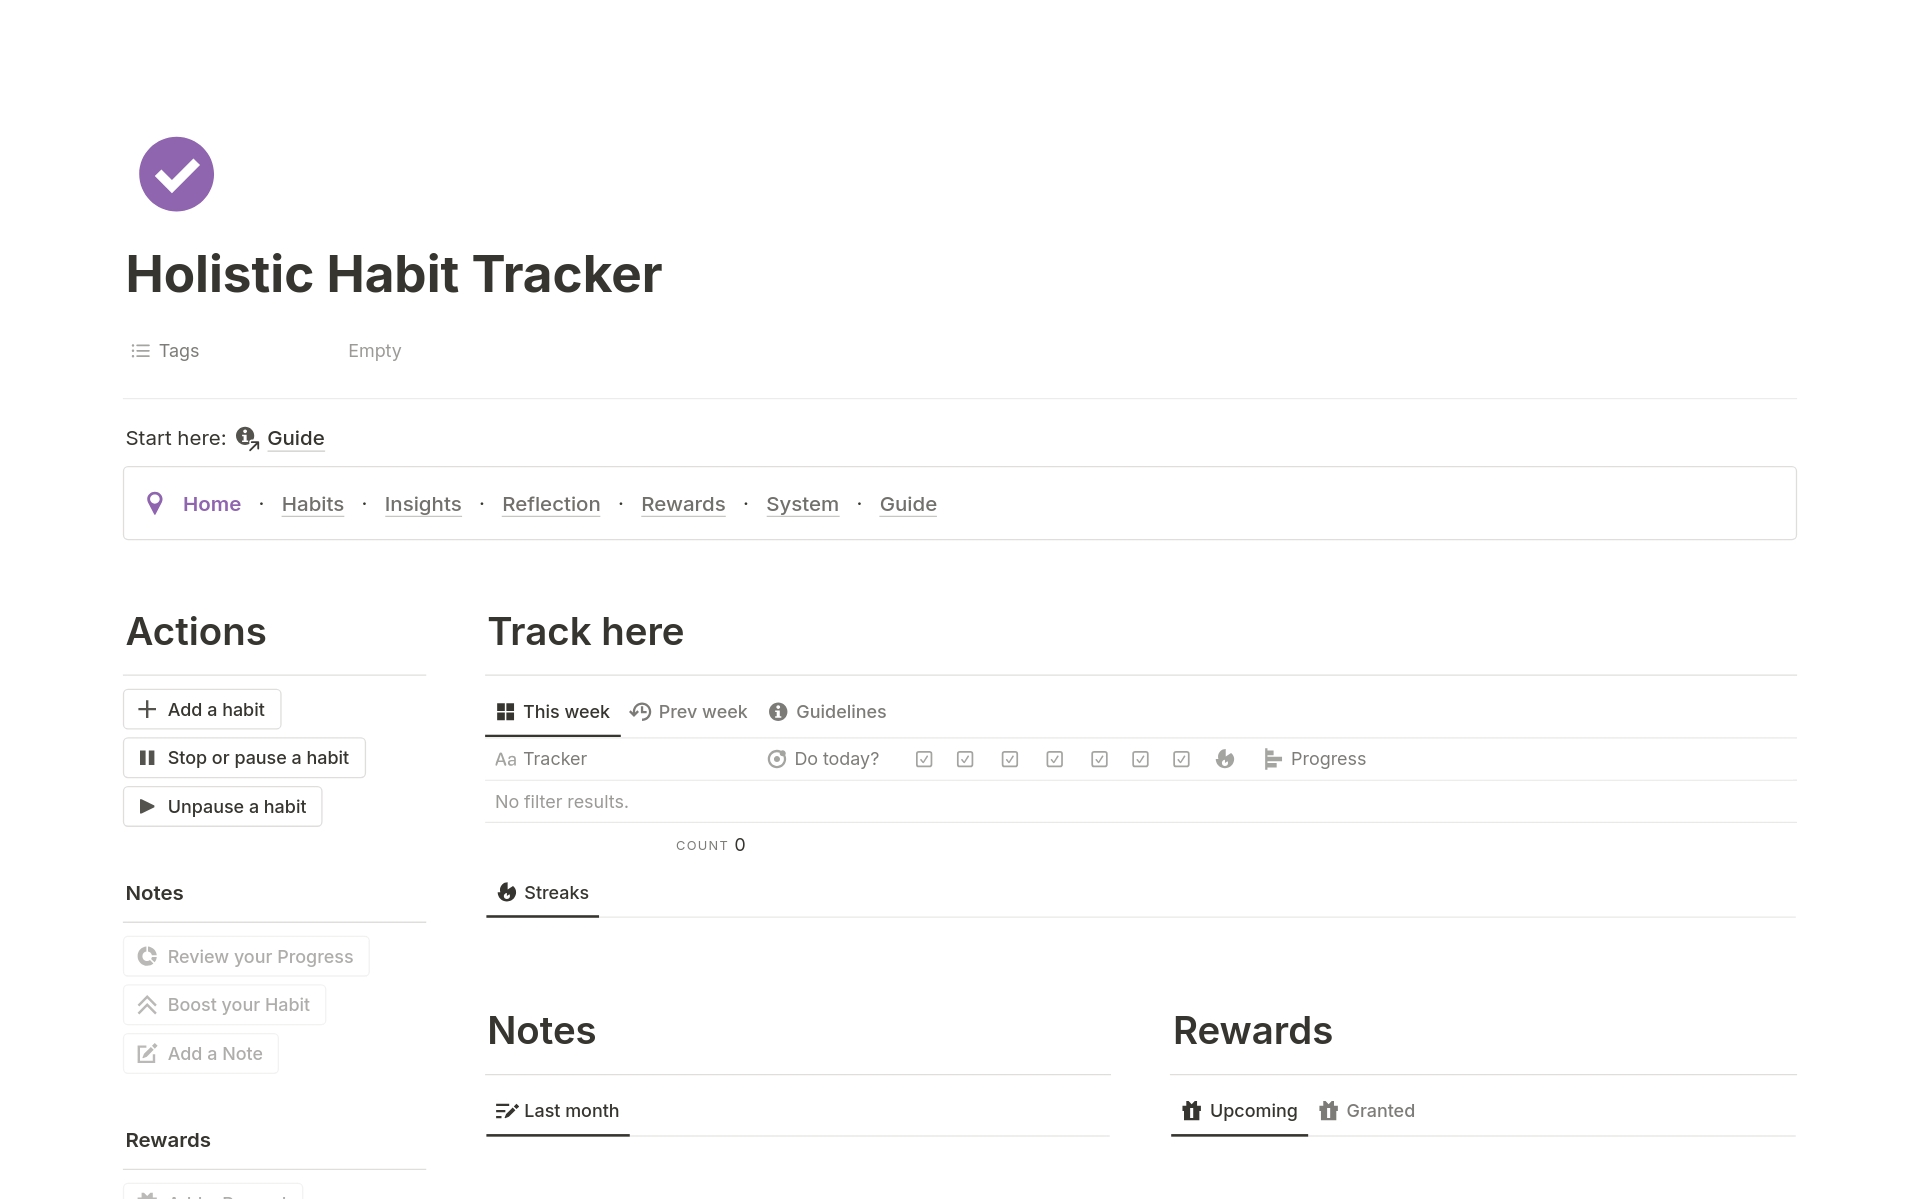 More than just a tracker,  this template serves as a comprehensive framework for habit development. Automated. Streaks. Trends. Rewards. Non 7-day habits. Presets for regular reviews and brainstorming ideas to overcome difficulties in your transformation journey. Enjoy!